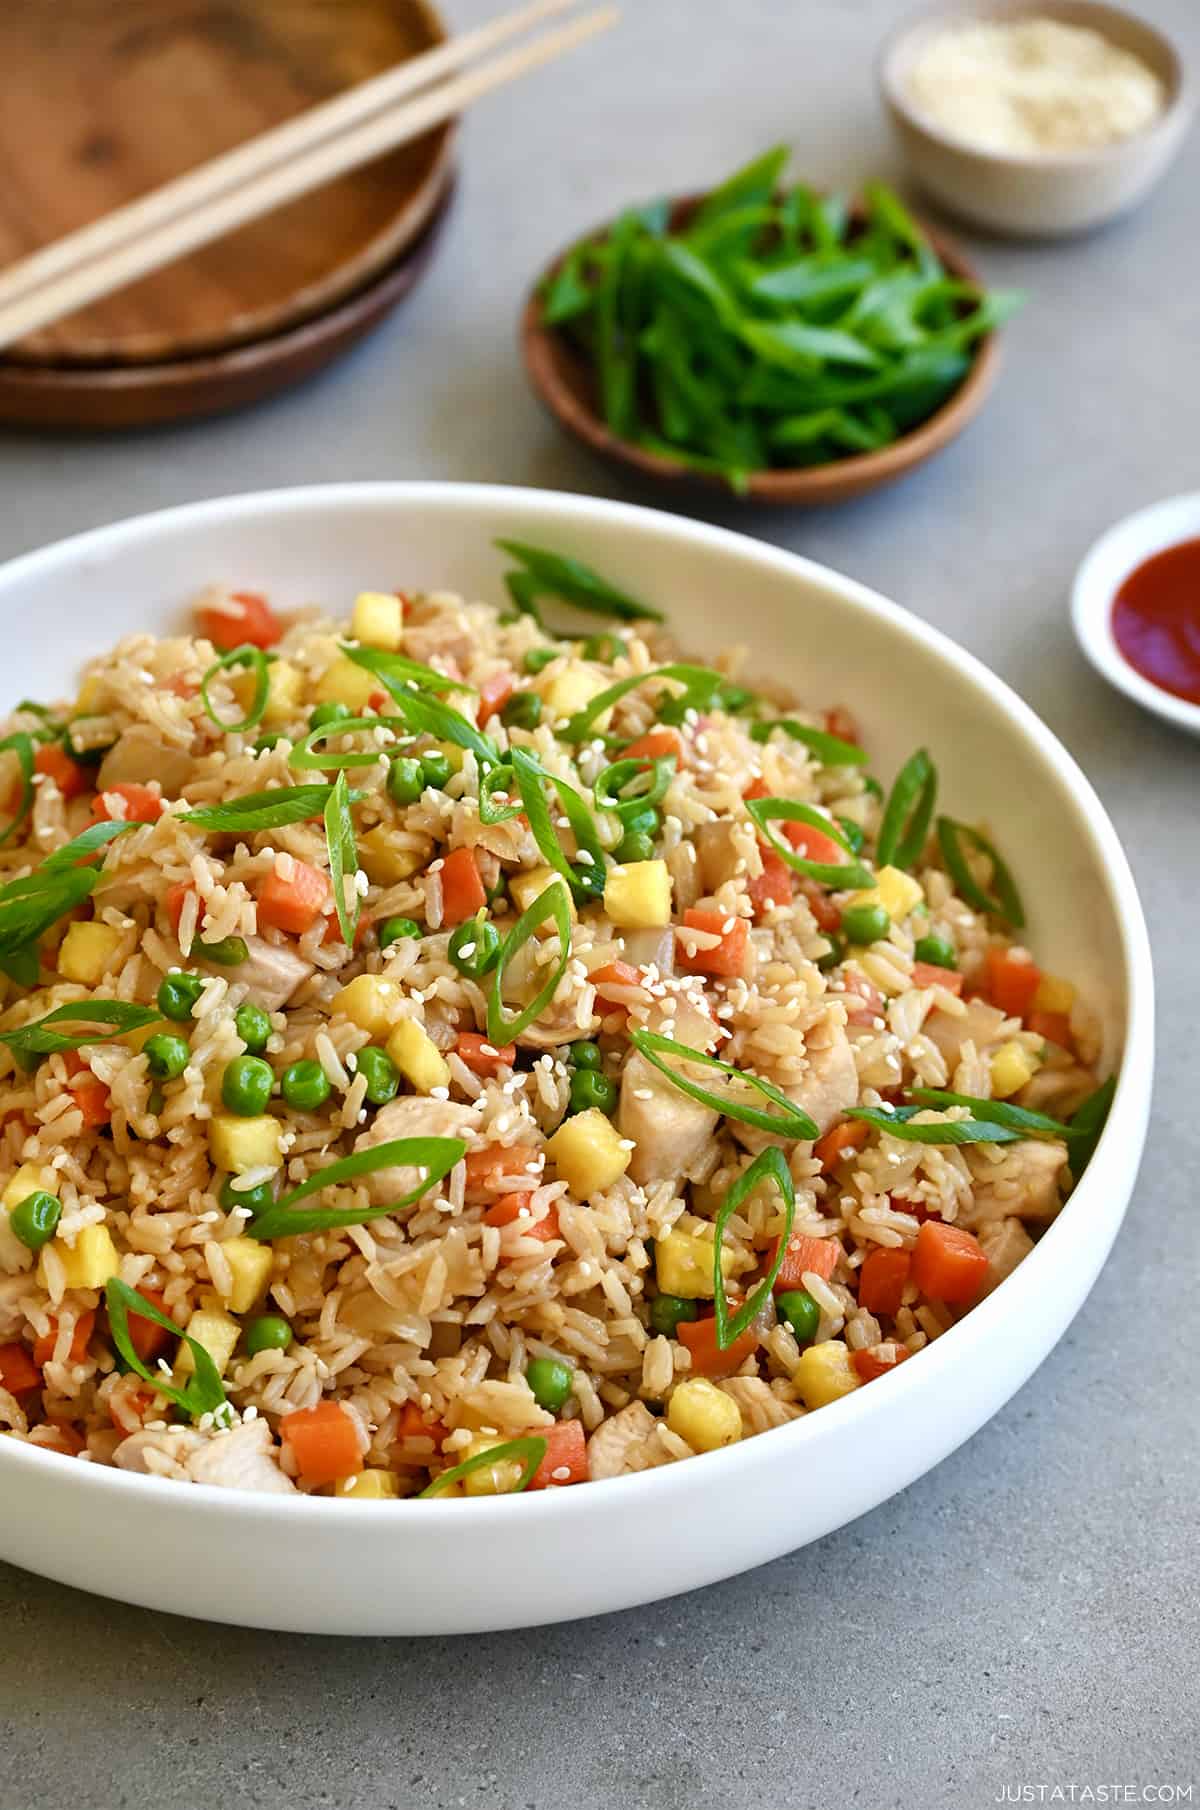 Pineapple chicken fried rice in a white bowl next to a small bowl filled with sliced scallions.